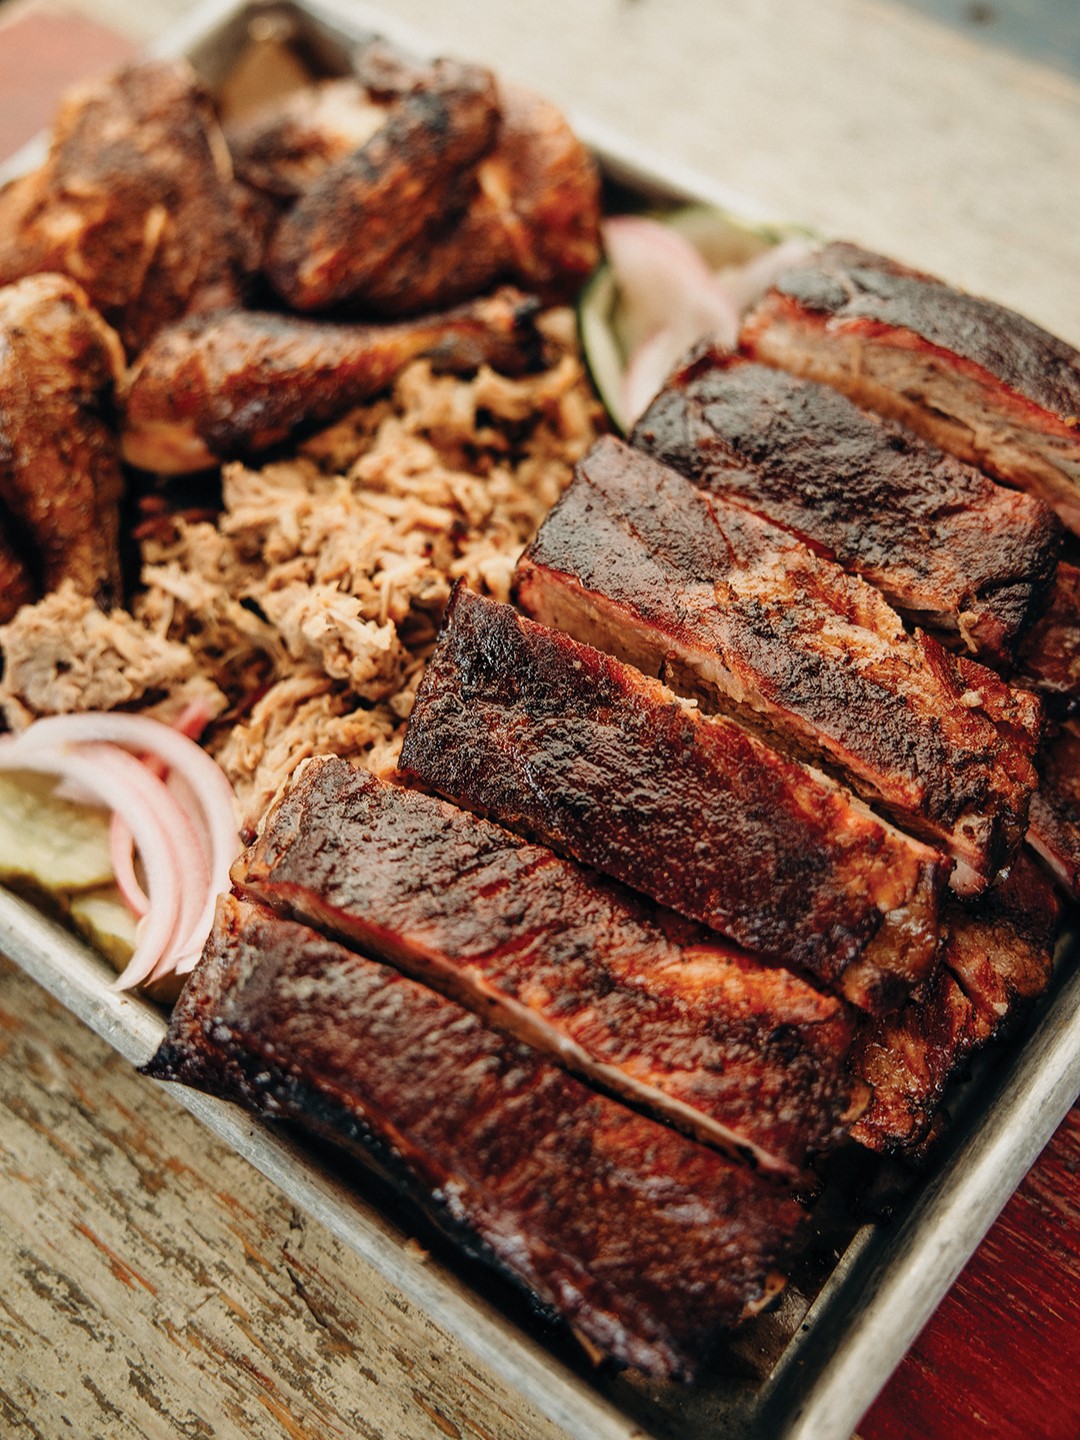 A barbecue platter from Old Southern BBQ.